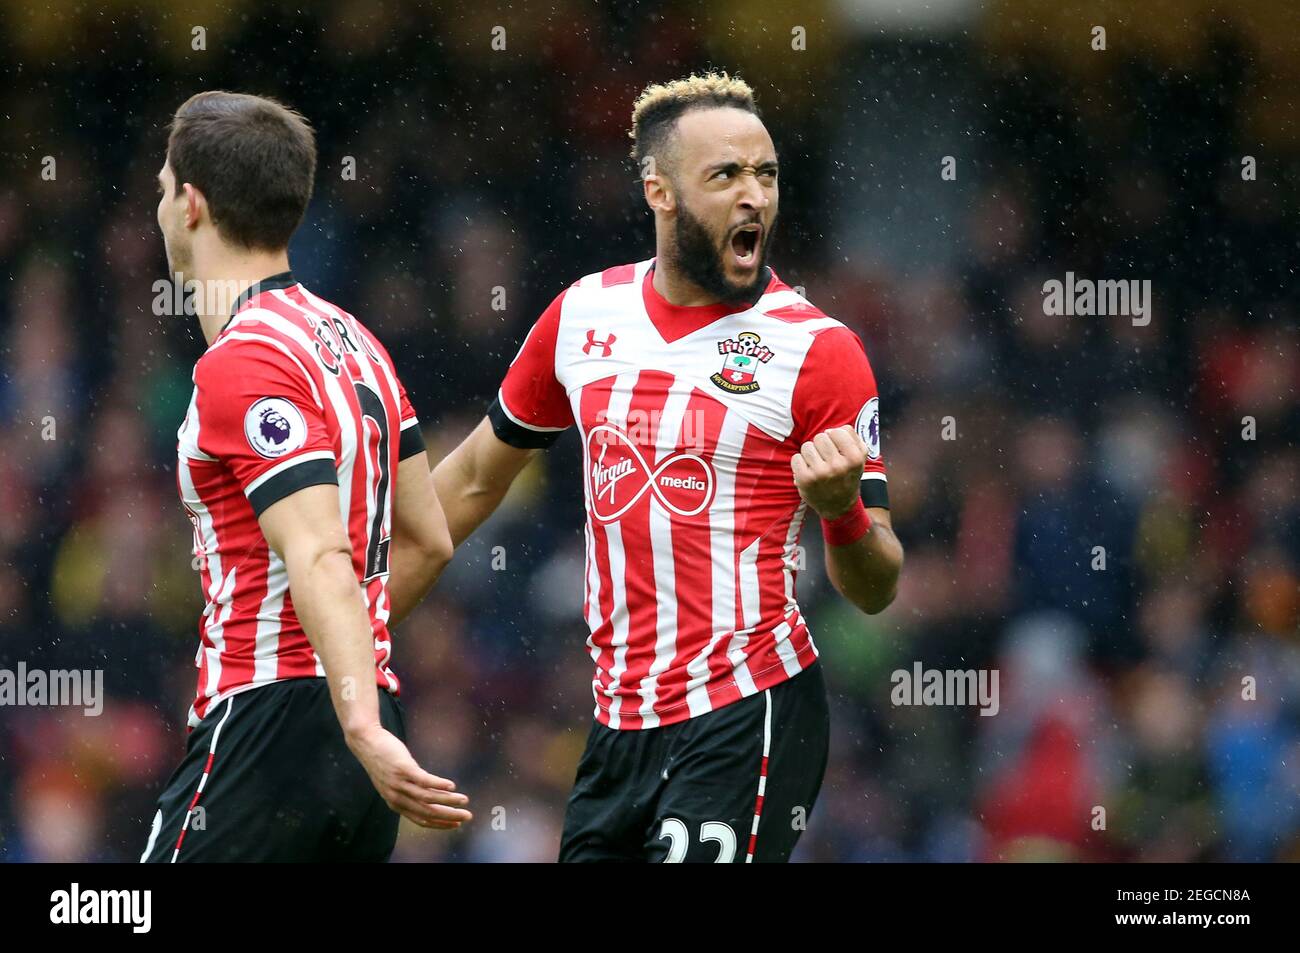 Britain Soccer Football - Watford v Southampton - Premier League - Vicarage Road - 4/3/17 Southampton's Nathan Redmond celebrates scoring their fourth goal Reuters / Paul Hackett Livepic EDITORIAL USE ONLY. No use with unauthorized audio, video, data, fixture lists, club/league logos or 'live' services. Online in-match use limited to 45 images, no video emulation. No use in betting, games or single club/league/player publications.  Please contact your account representative for further details. Stock Photo